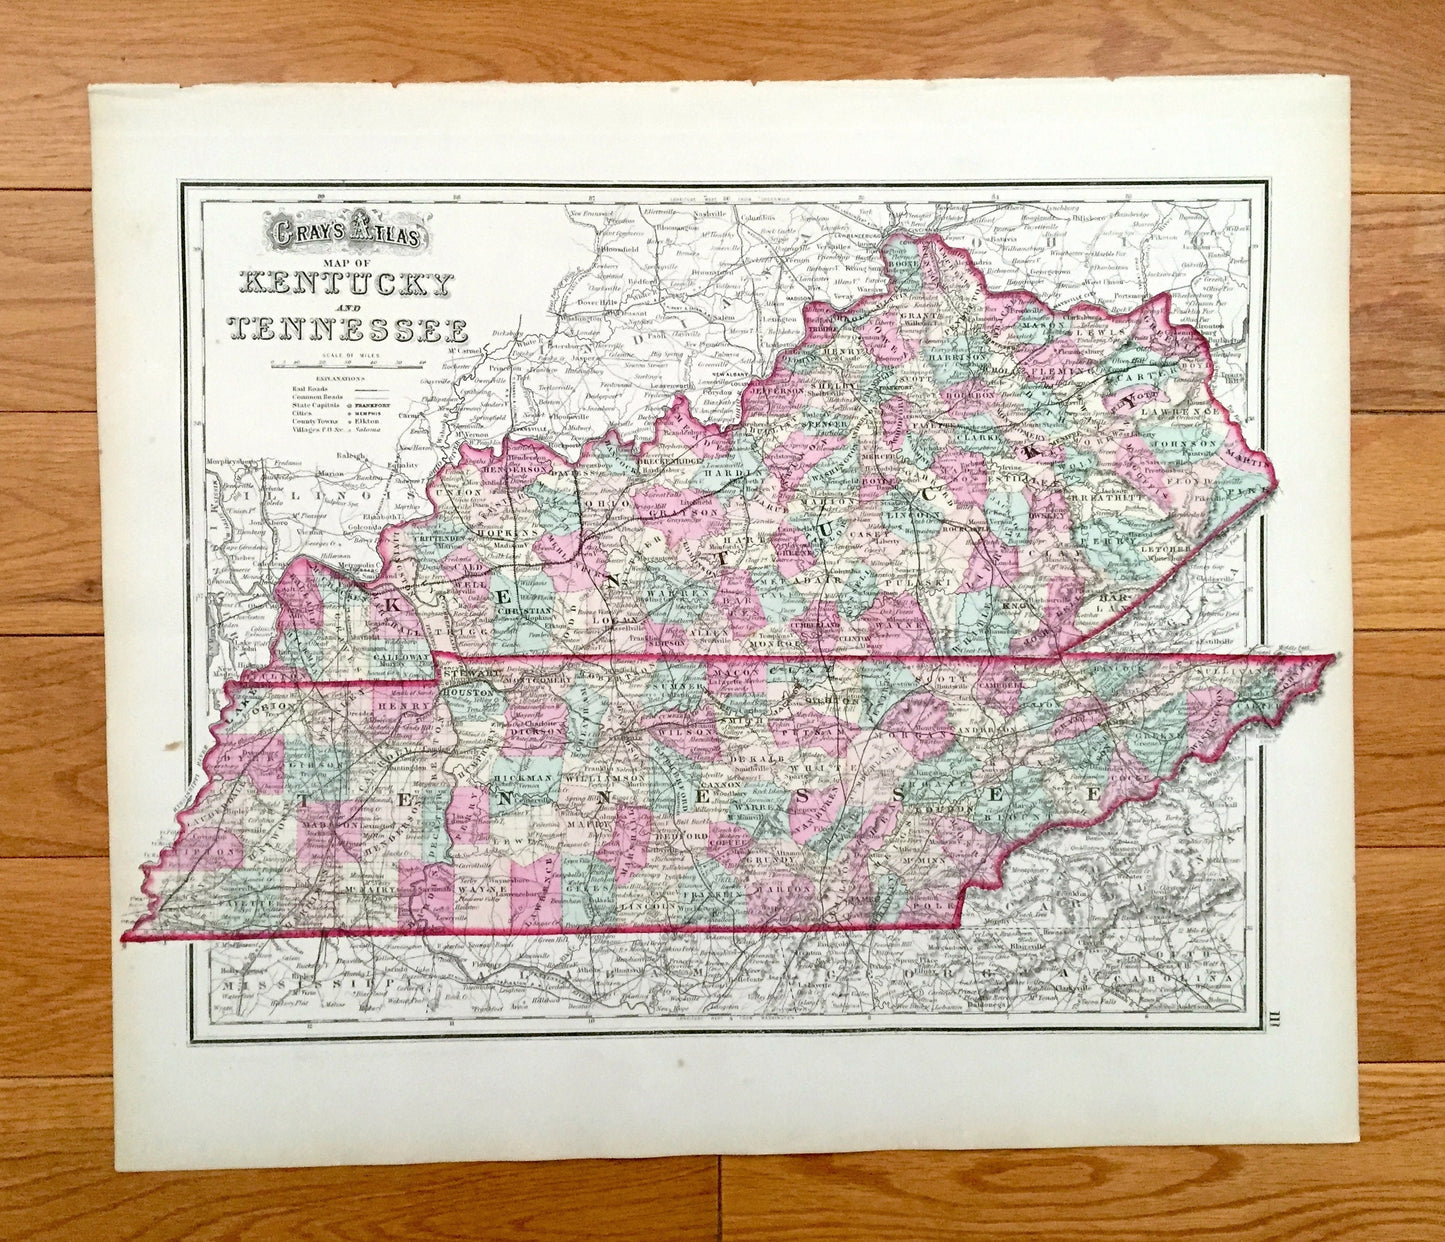 Antique 1874 Ohio / Kentucky and Tennessee State Map from O.W. Gray's Atlas of United States of America; Stedman, Brown & Lyon – Louisville